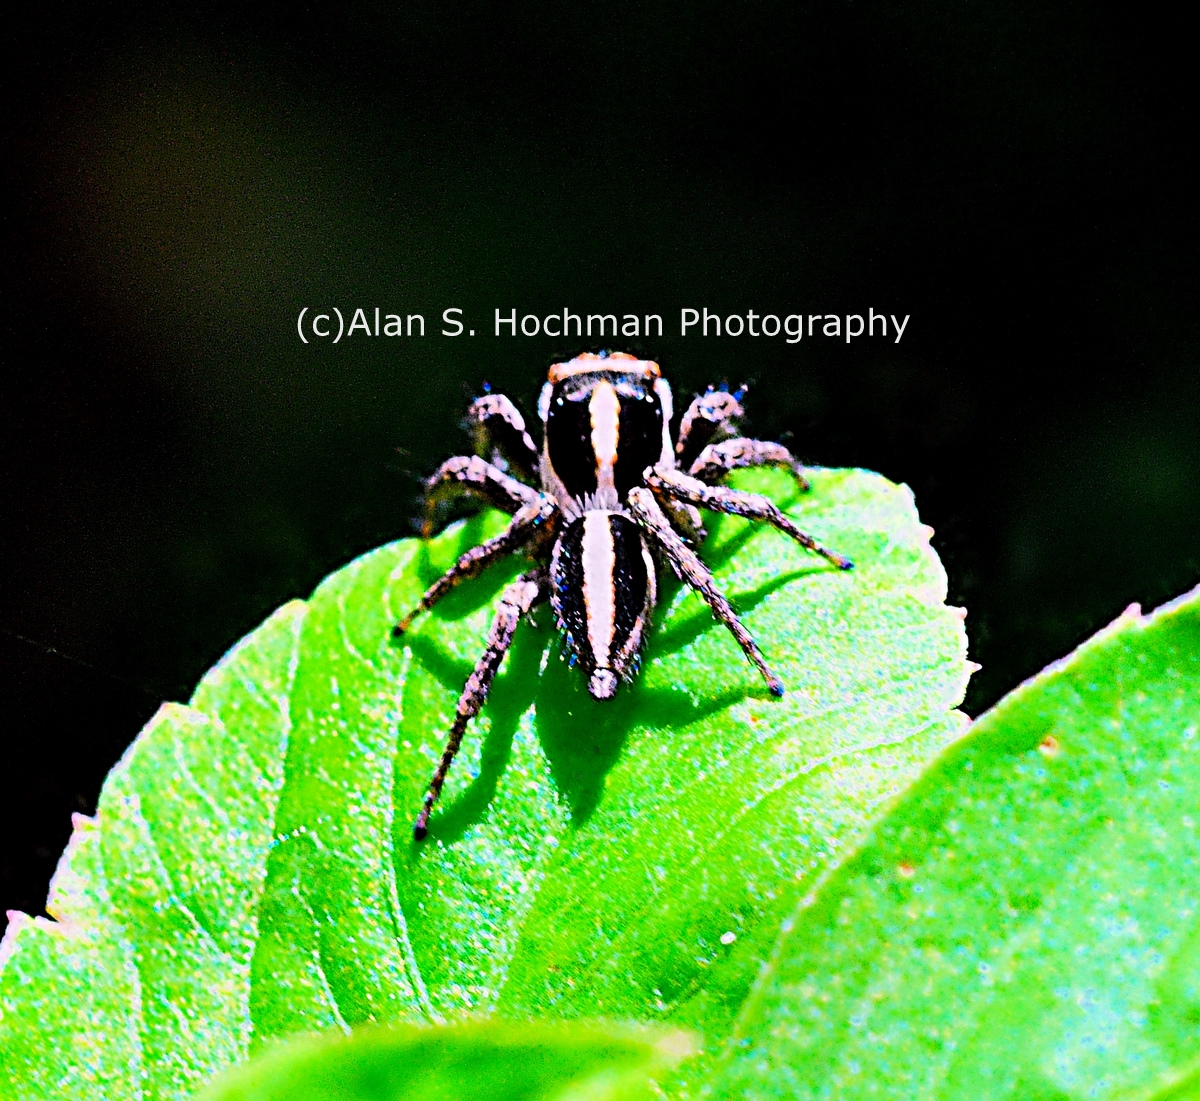 "Jumping Spider at Enchanted Forest Park"